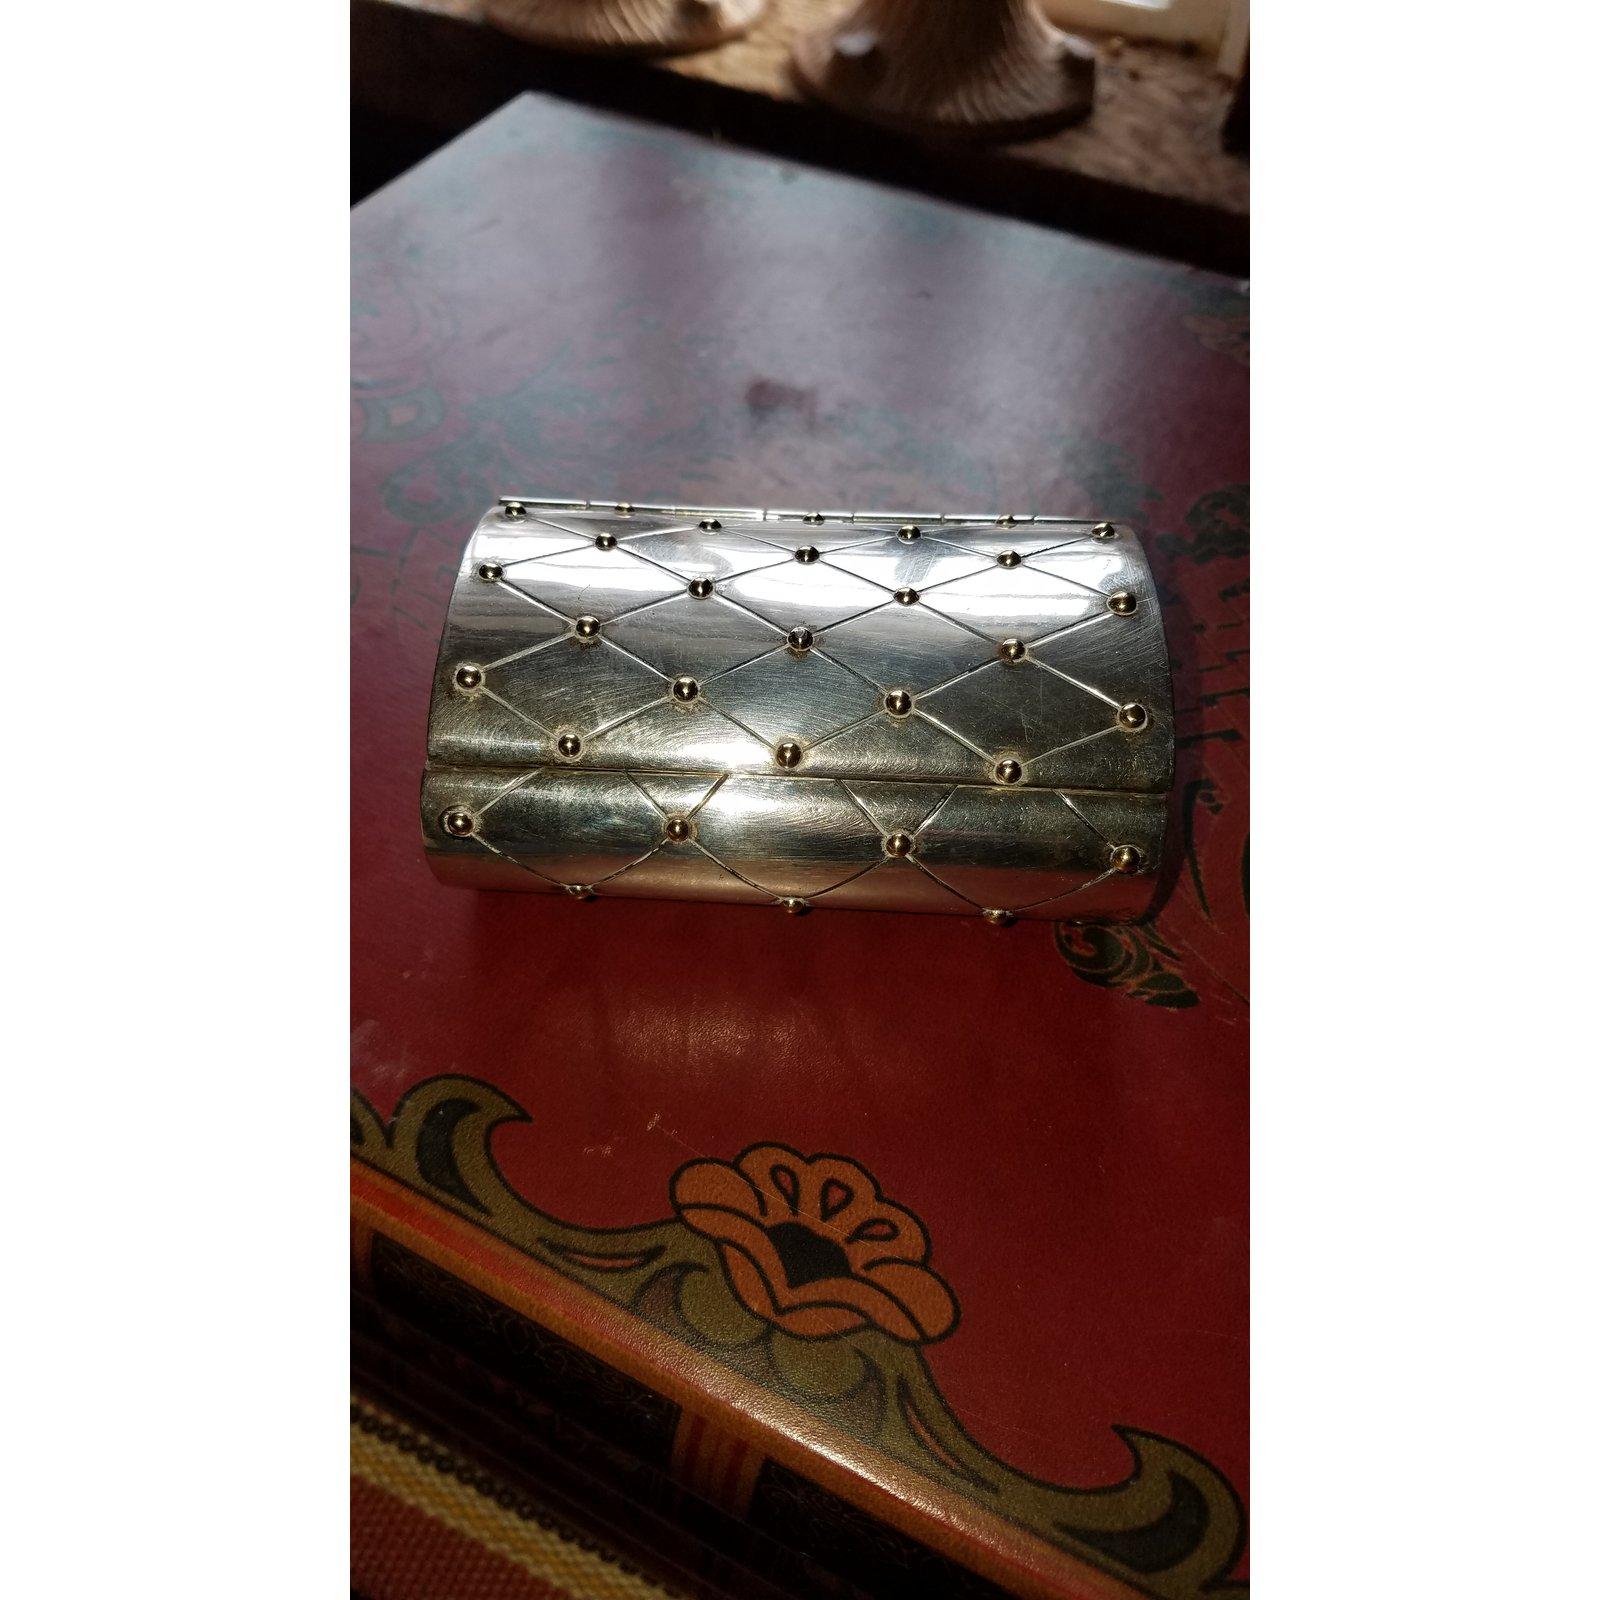 Classic Sterling and gold quilted design box by William Spratling, signed on bottom. The silver background with lattice quilted pattern with gold beads at the corners.